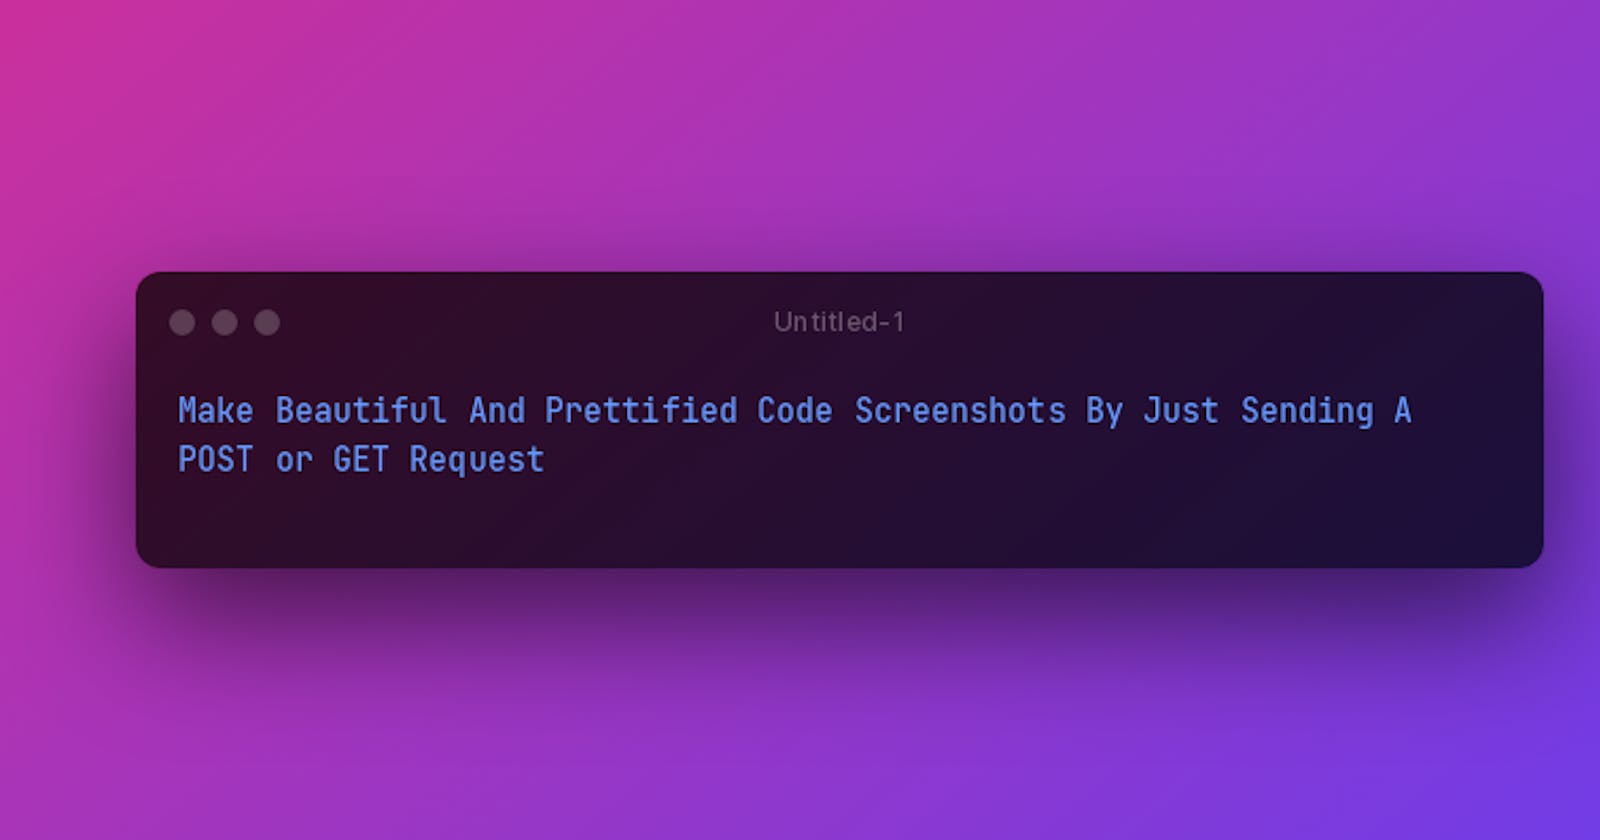 Make Beautiful And Prettified Code Screenshots By Just Sending A POST or GET Request